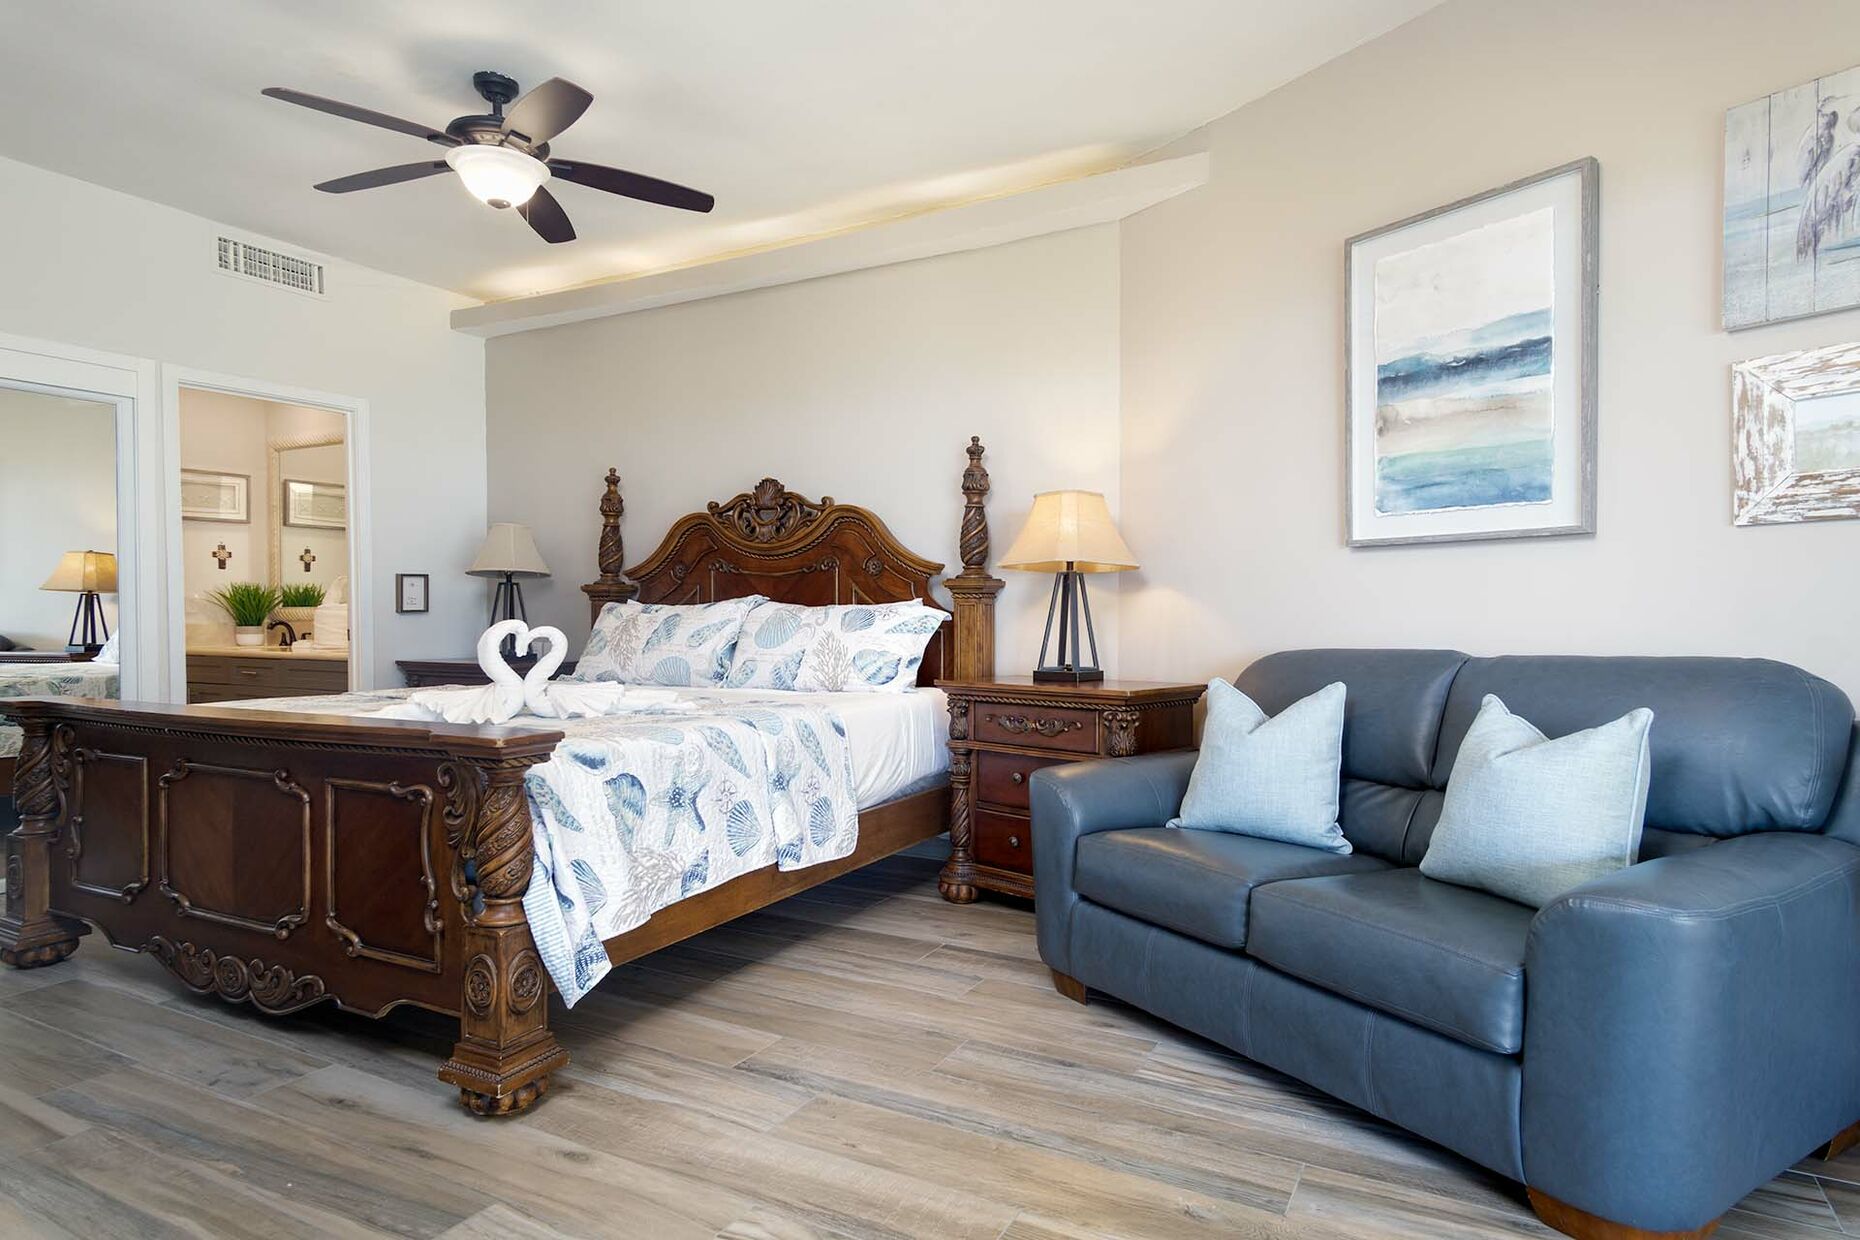 Recessed lighting adds to the calm ambiance of the Master bedroom.